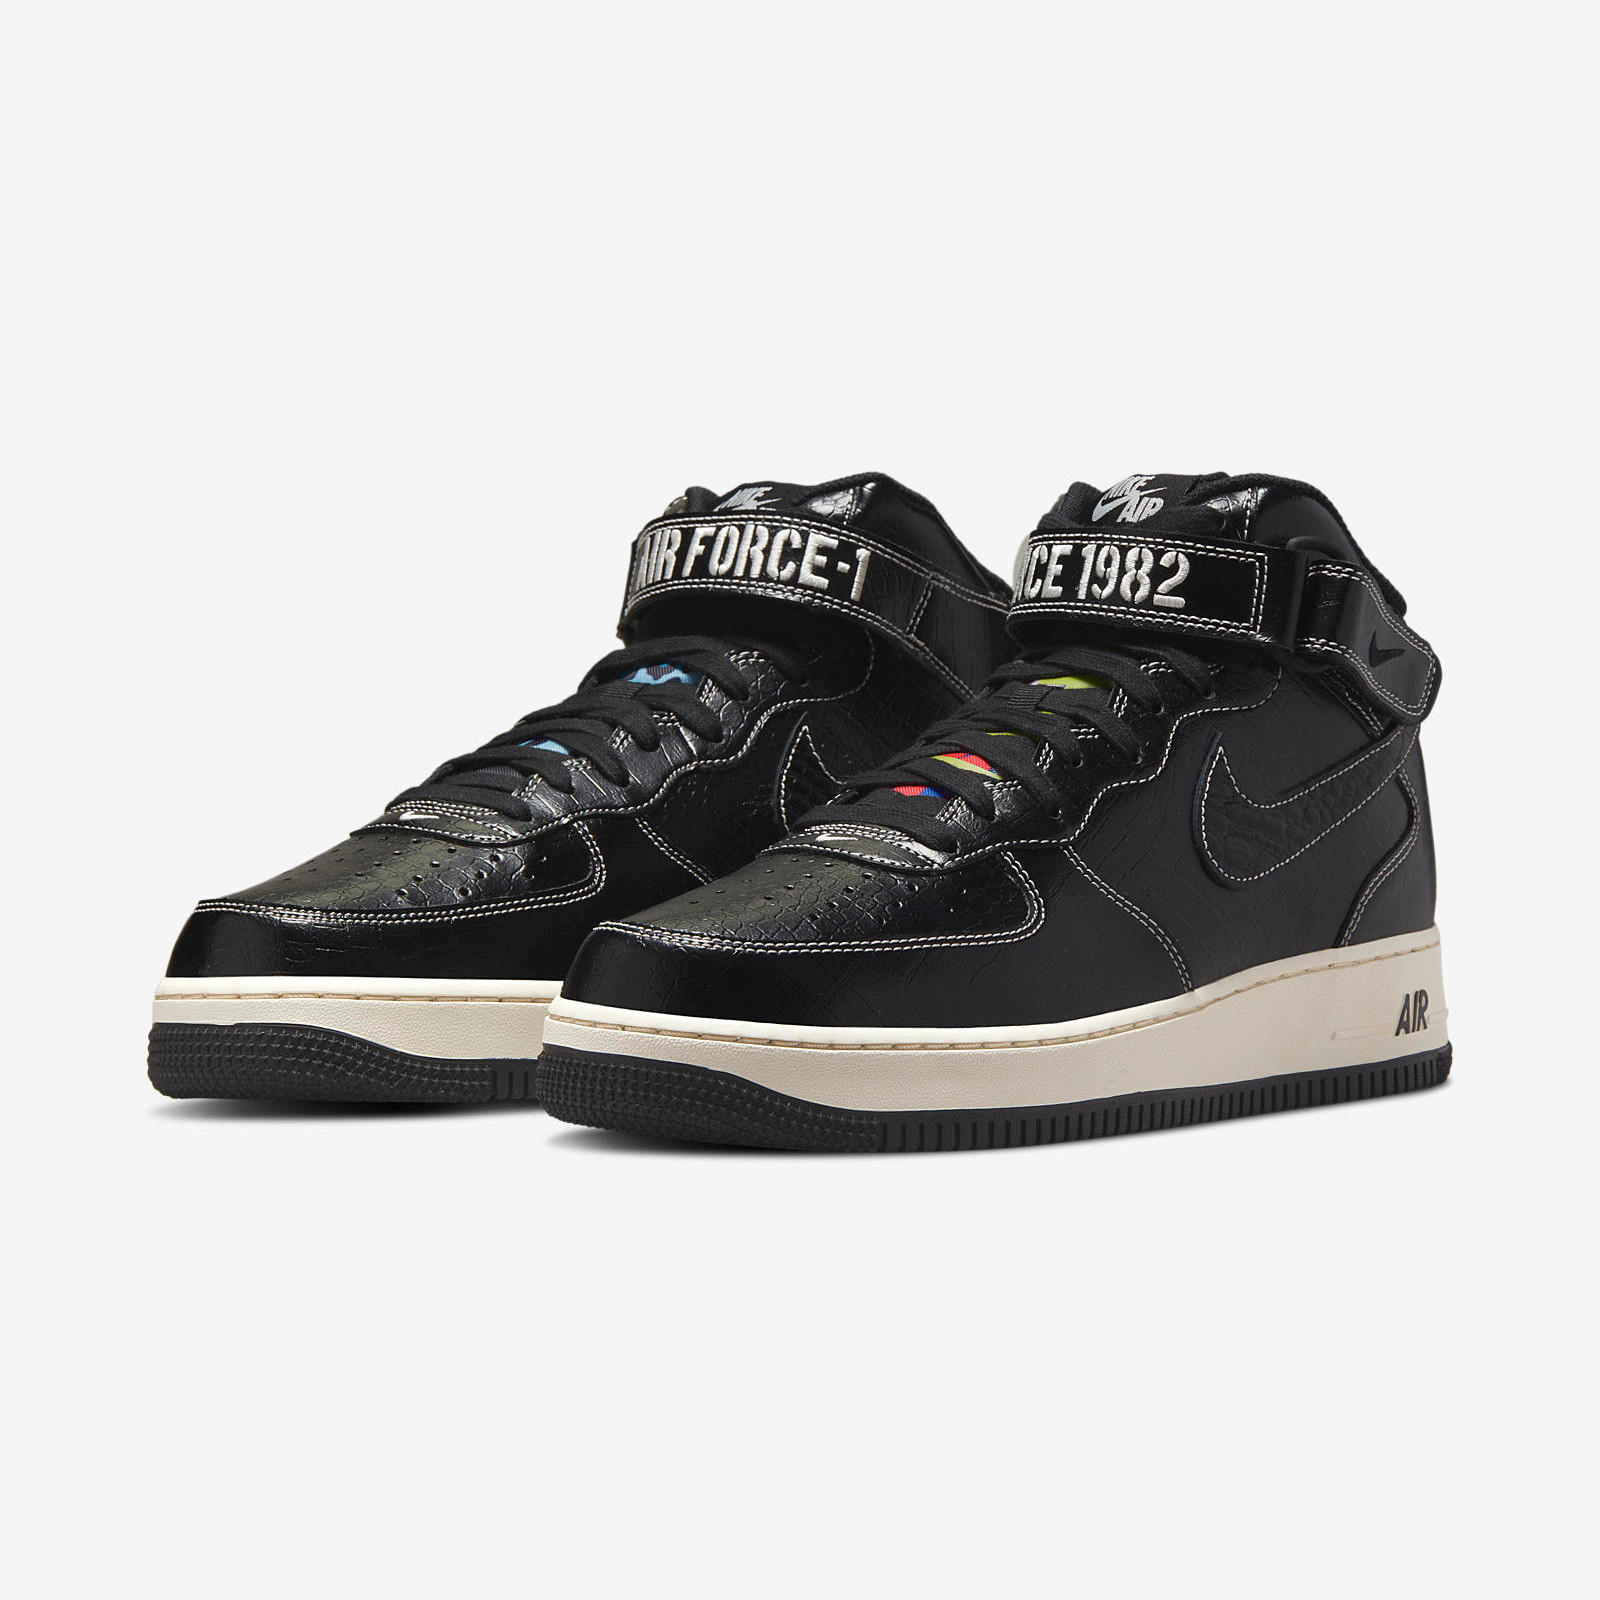 Nike Air Force 1 Mid
« Our Force 1 »